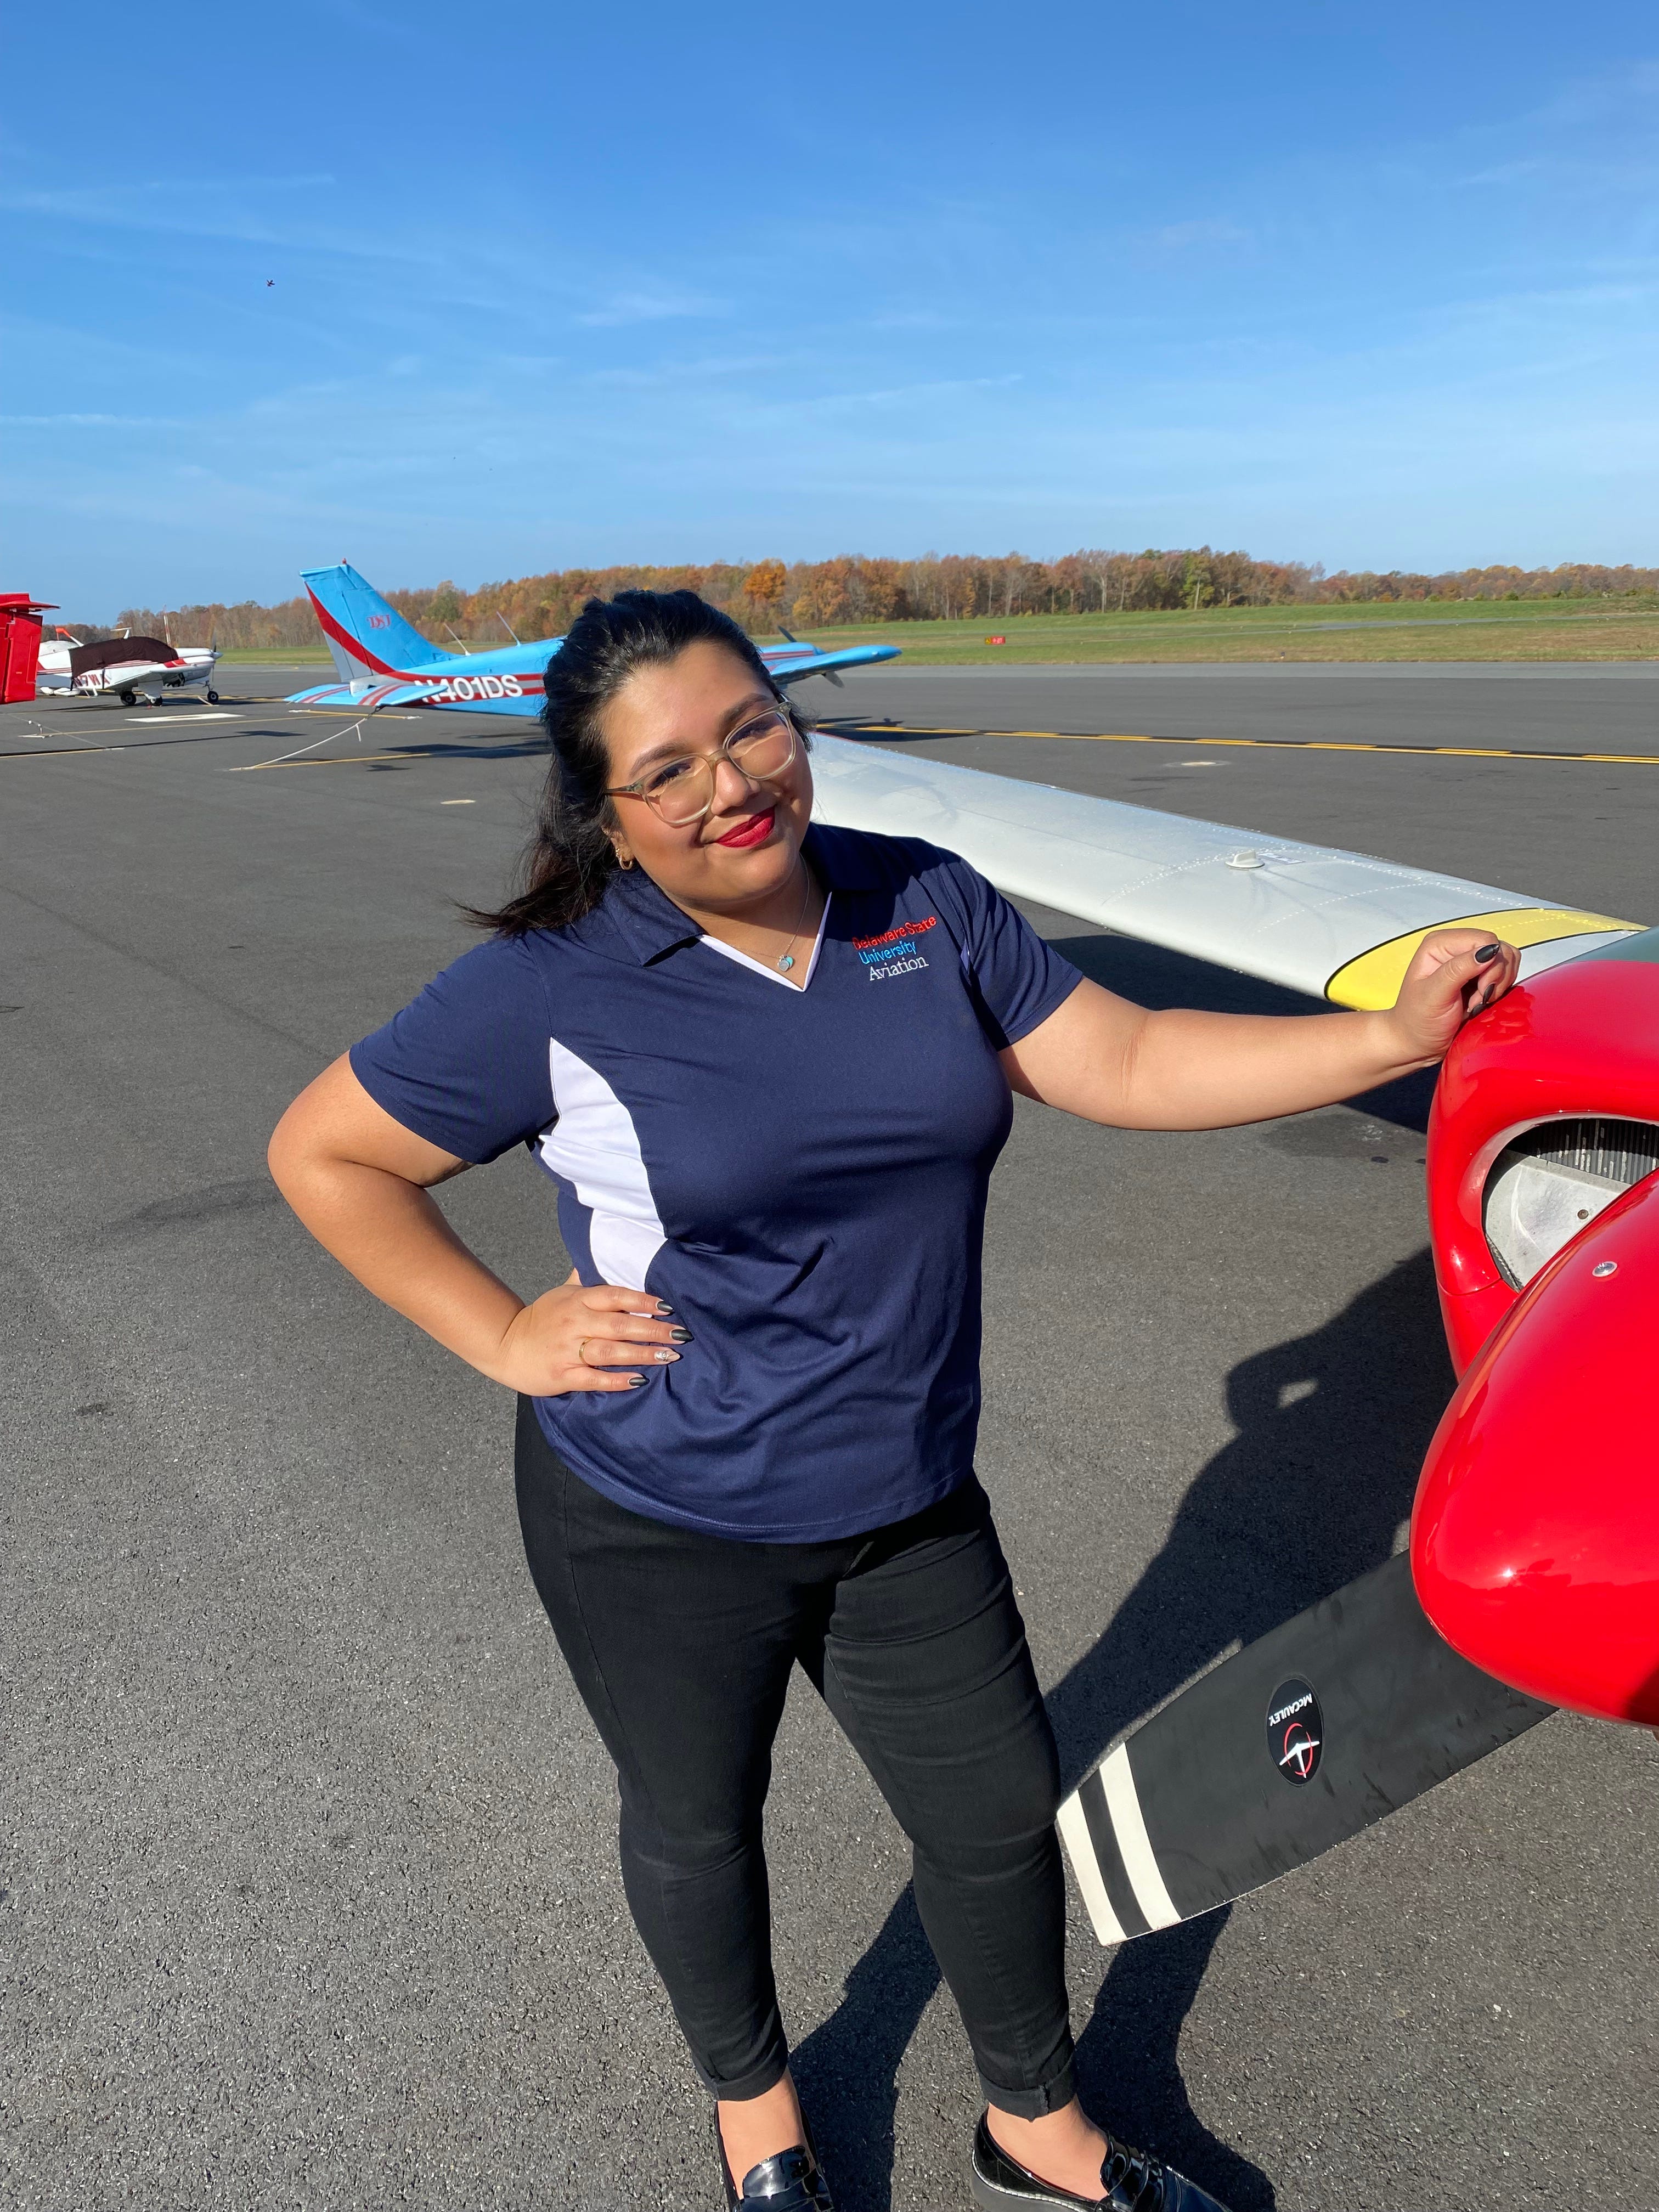 Eliana Rothwell poses at the Delaware Airpark in Dover after earning her commercial pilot certificate, while studying aviation at Delaware State University. Rothwell will graduate with a professional pilot degree in 2023.